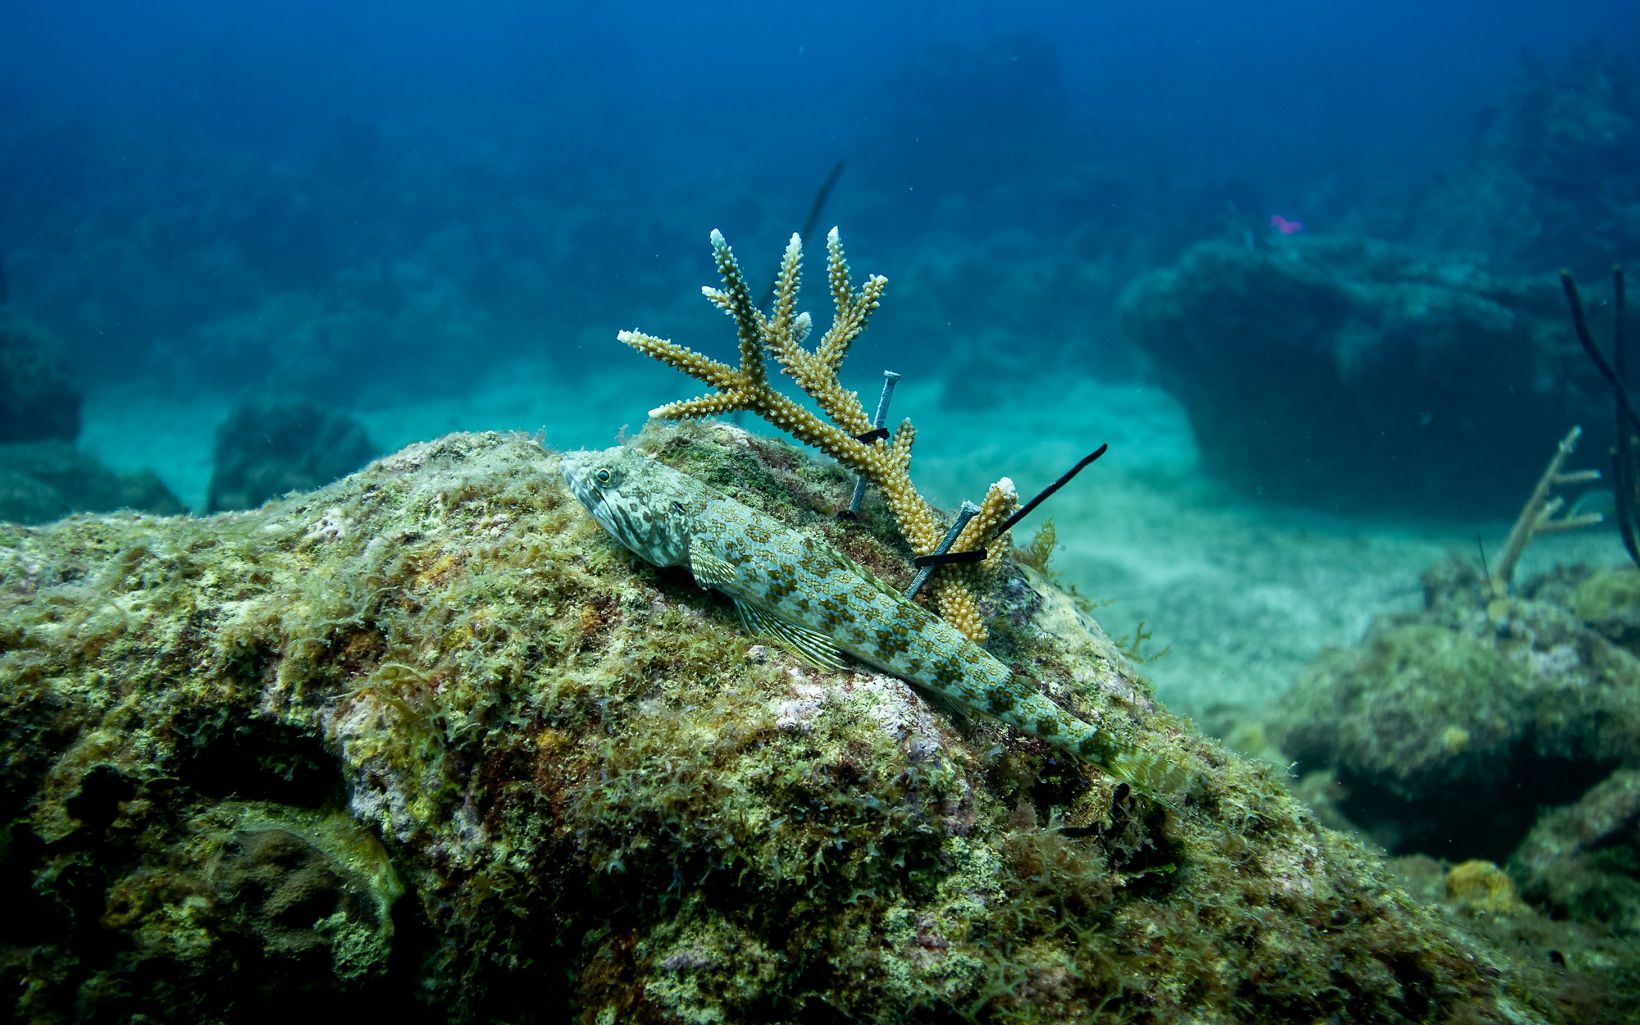 A coral fragment has been zip tied to an unhealthy reef as part of restoration work